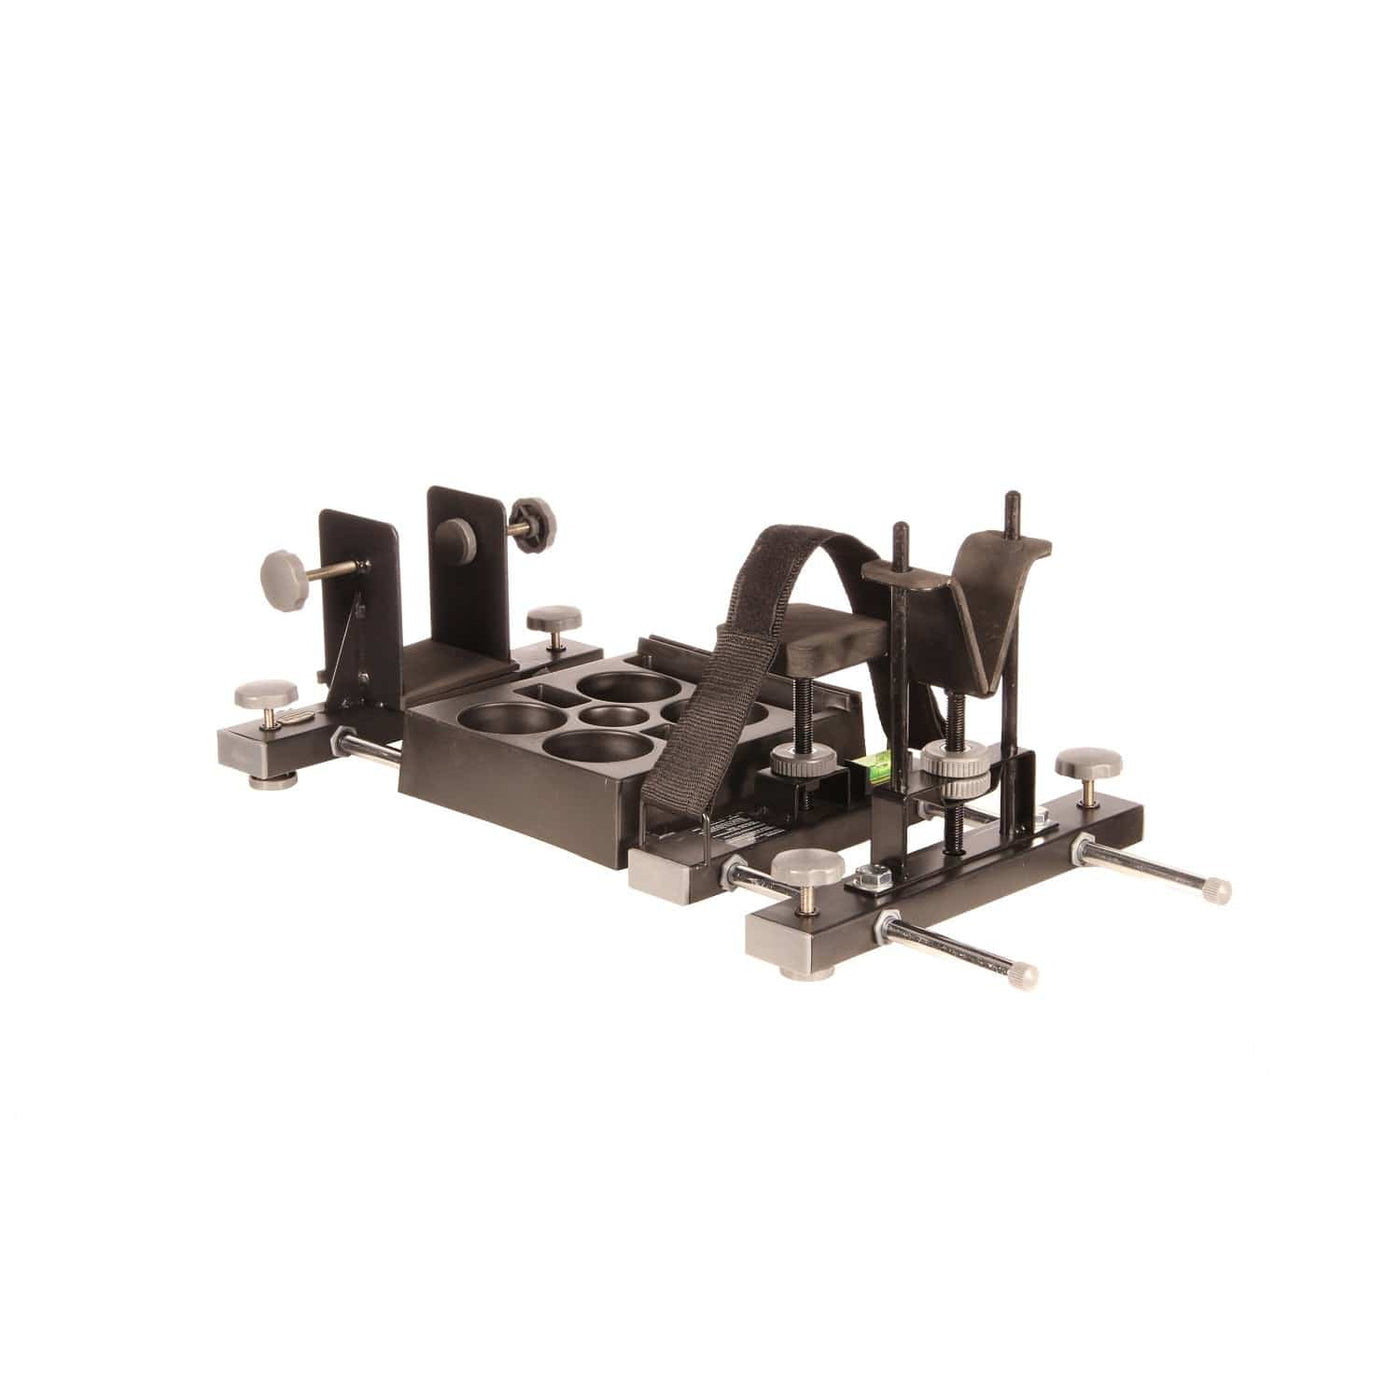 Hyskore Hyskore Cleaning and Sighting Vise Shooting